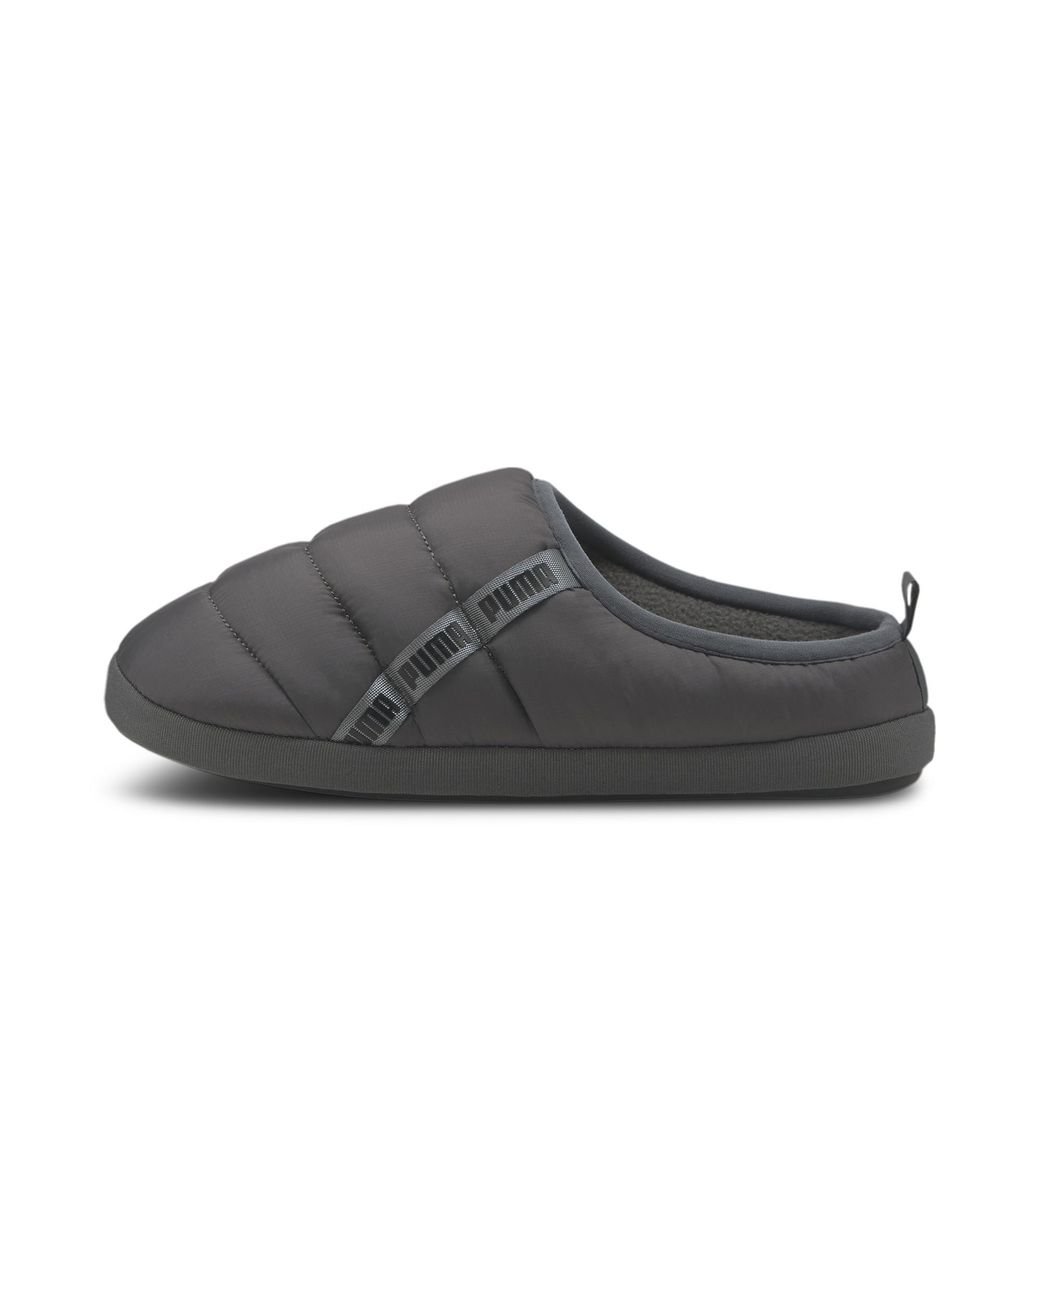 PUMA Synthetic Scuff Slippers Shoes in Black for Men - Lyst